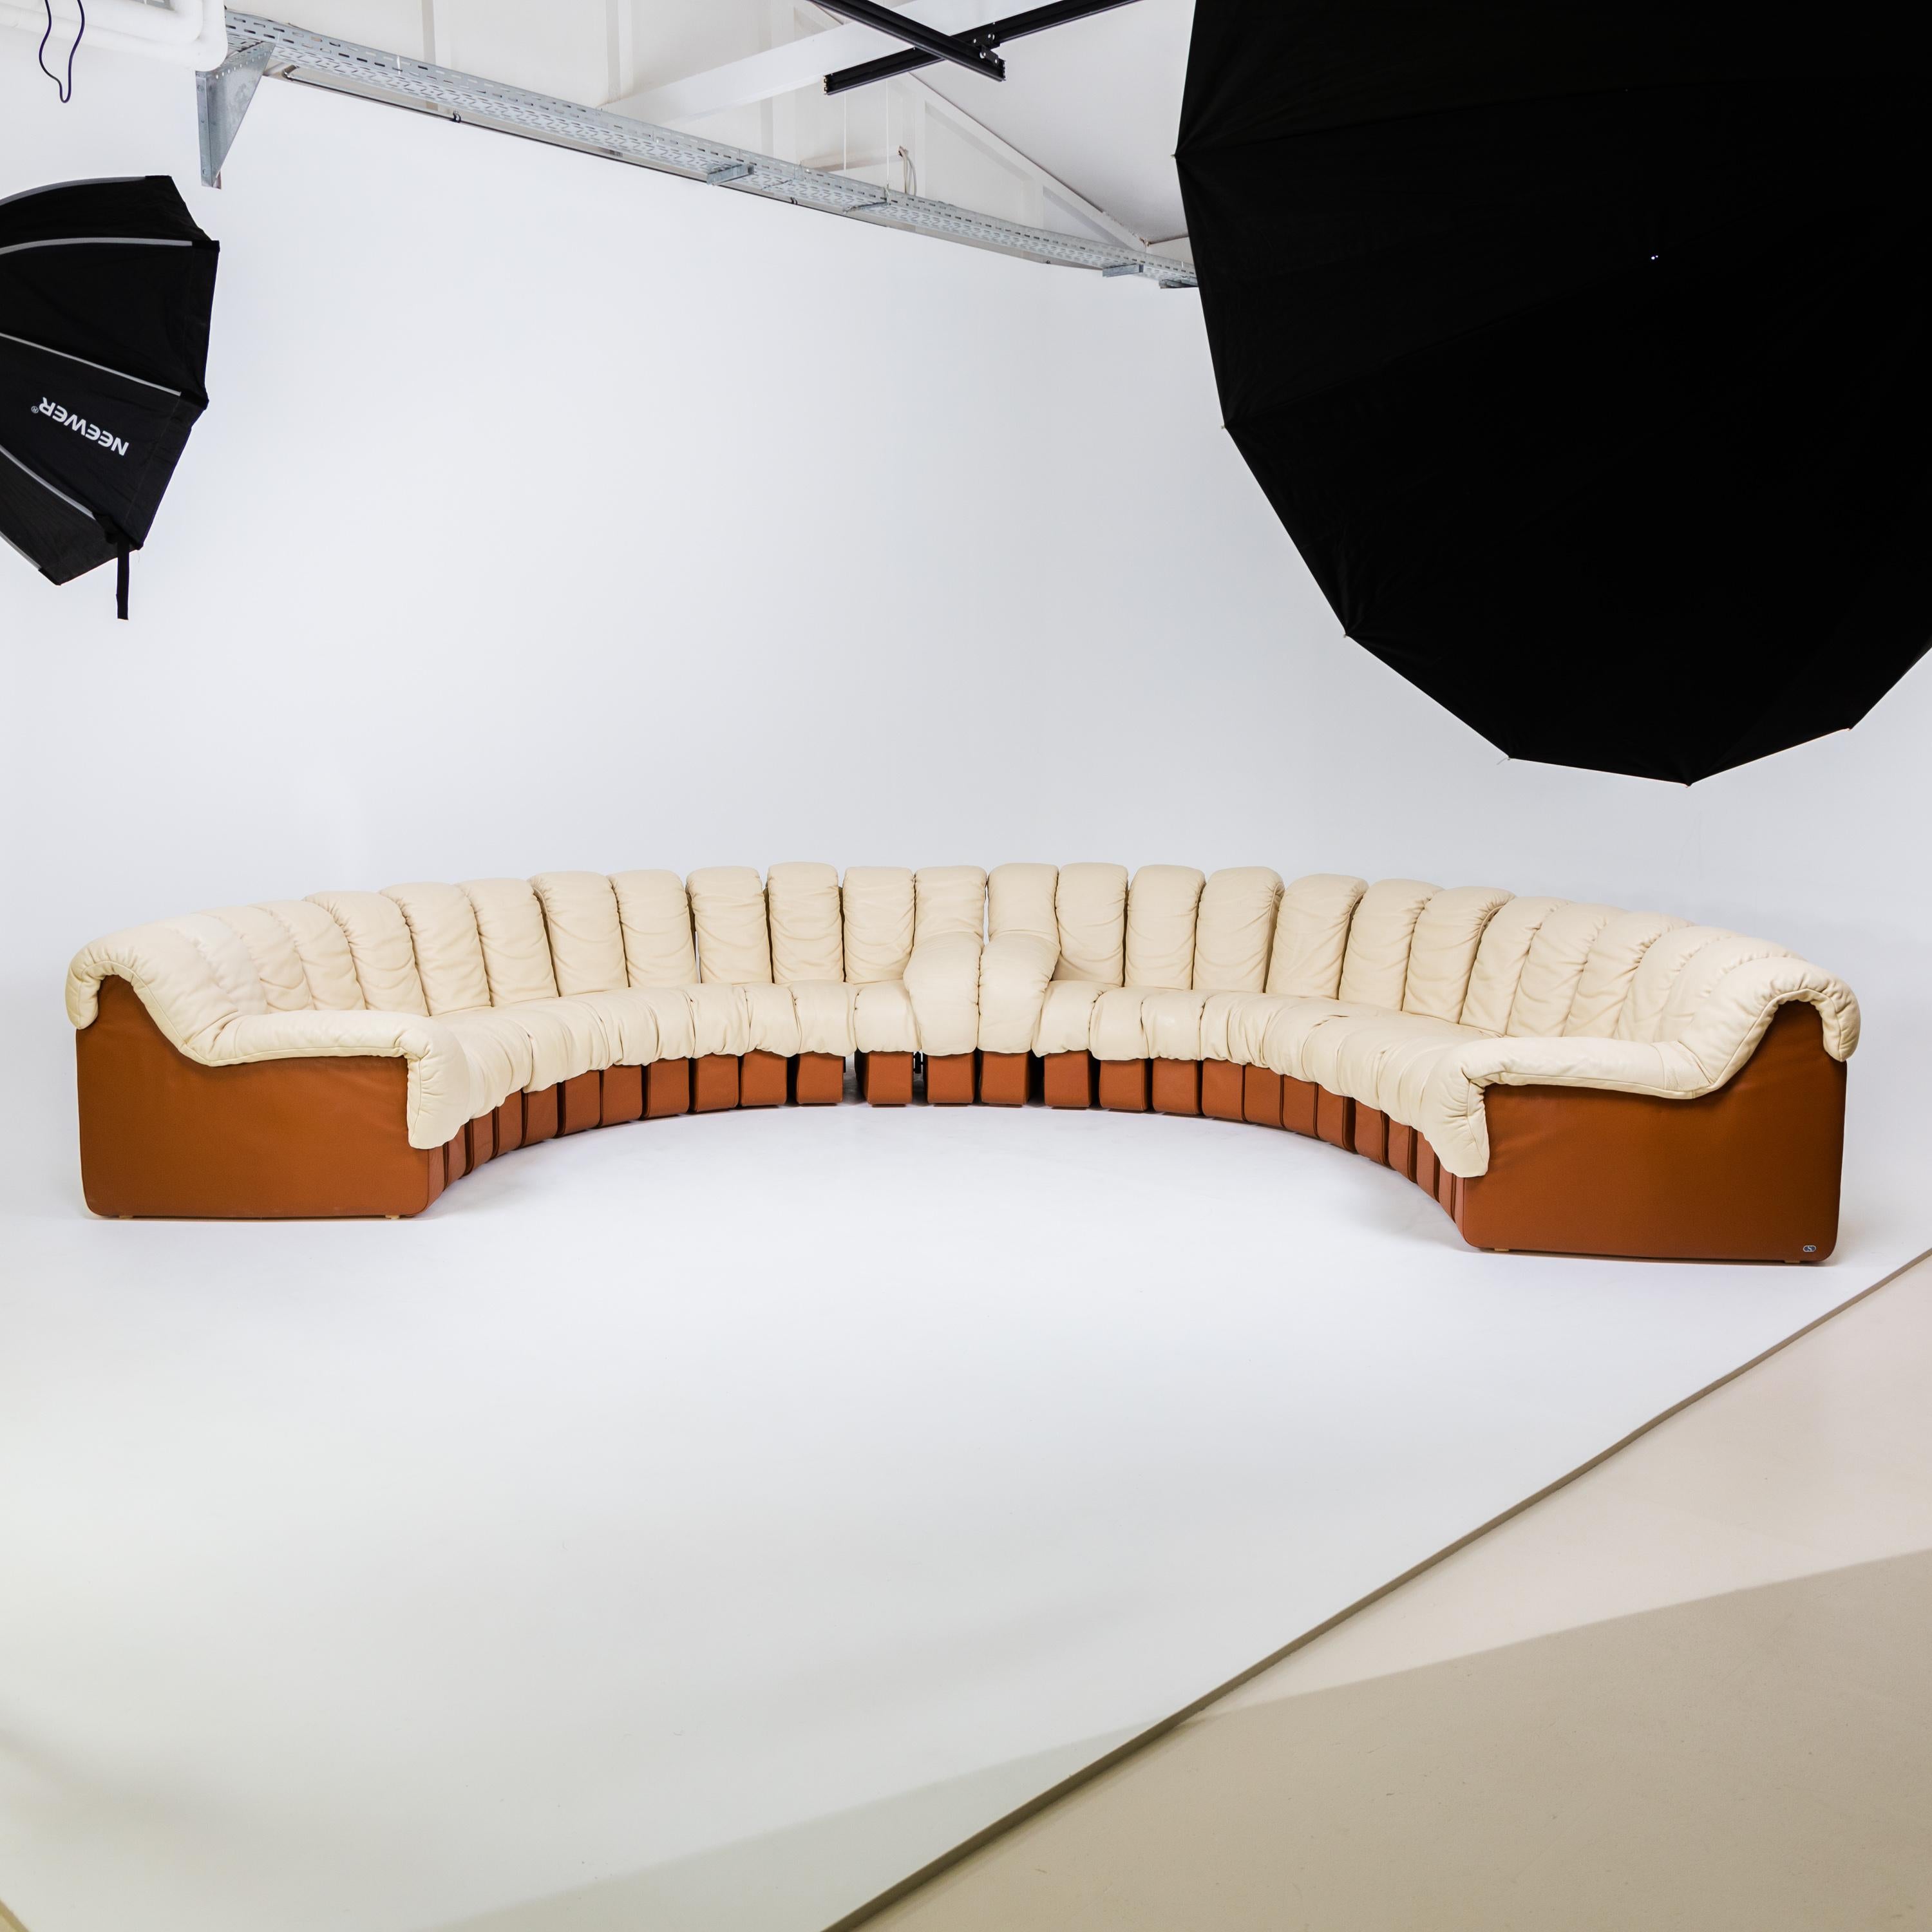 Pair of De Sede sofas, model DS600, designed by Eleanora Peduzzi-Riva, Heinz Ulrich, Ueli Berger and Klaus Vogt for De Sede in 1972. The two sofas consist of 13 elements each with armrests at the ends and are upholstered in a beige and brown